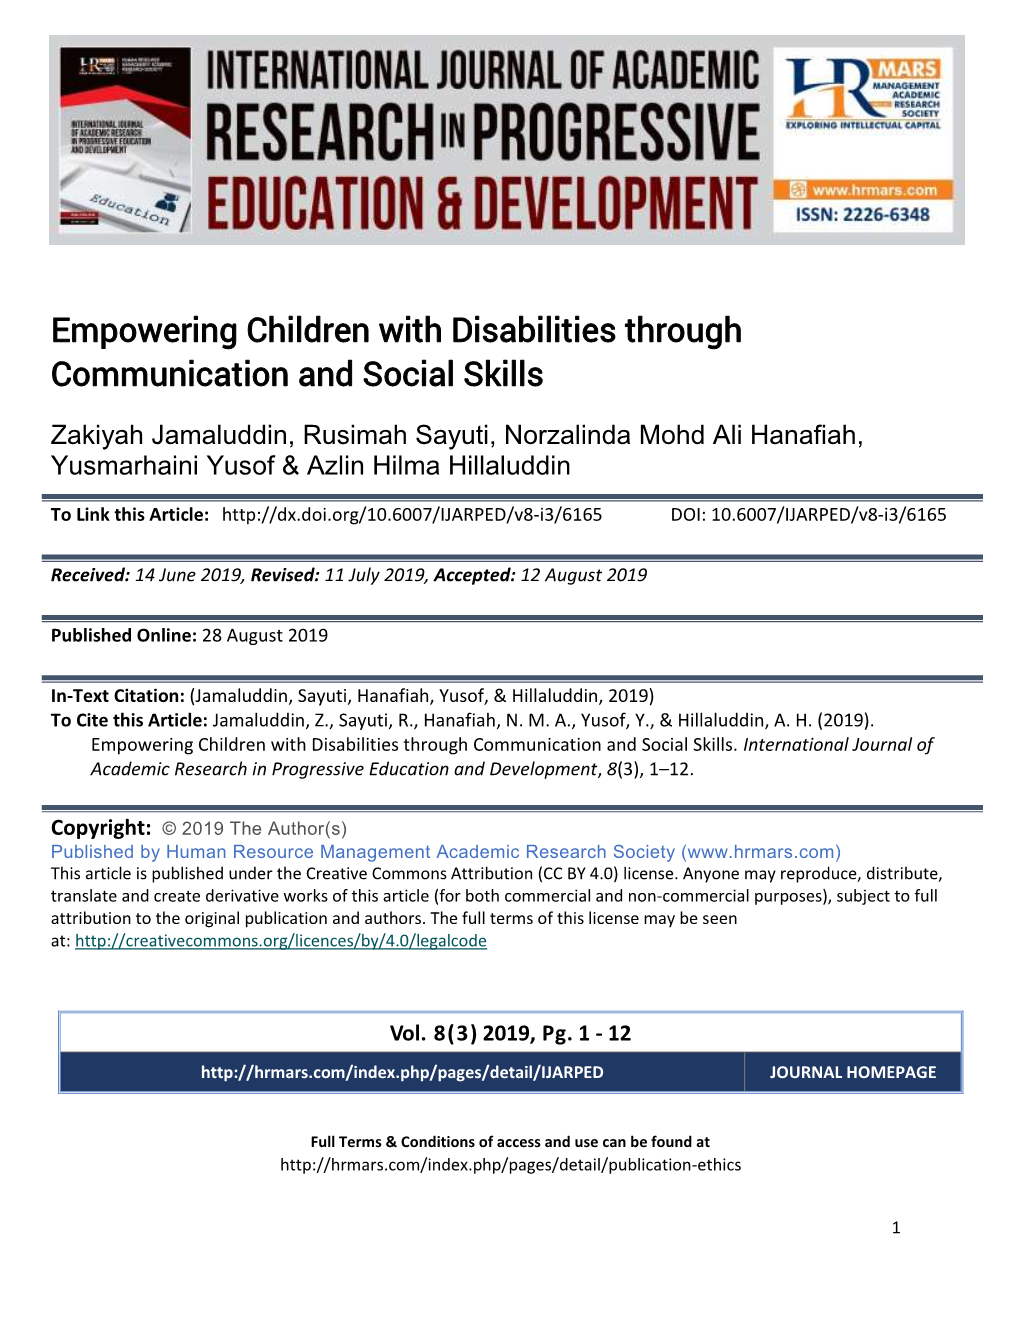 Empowering Children with Disabilities Through Communication and Social Skills